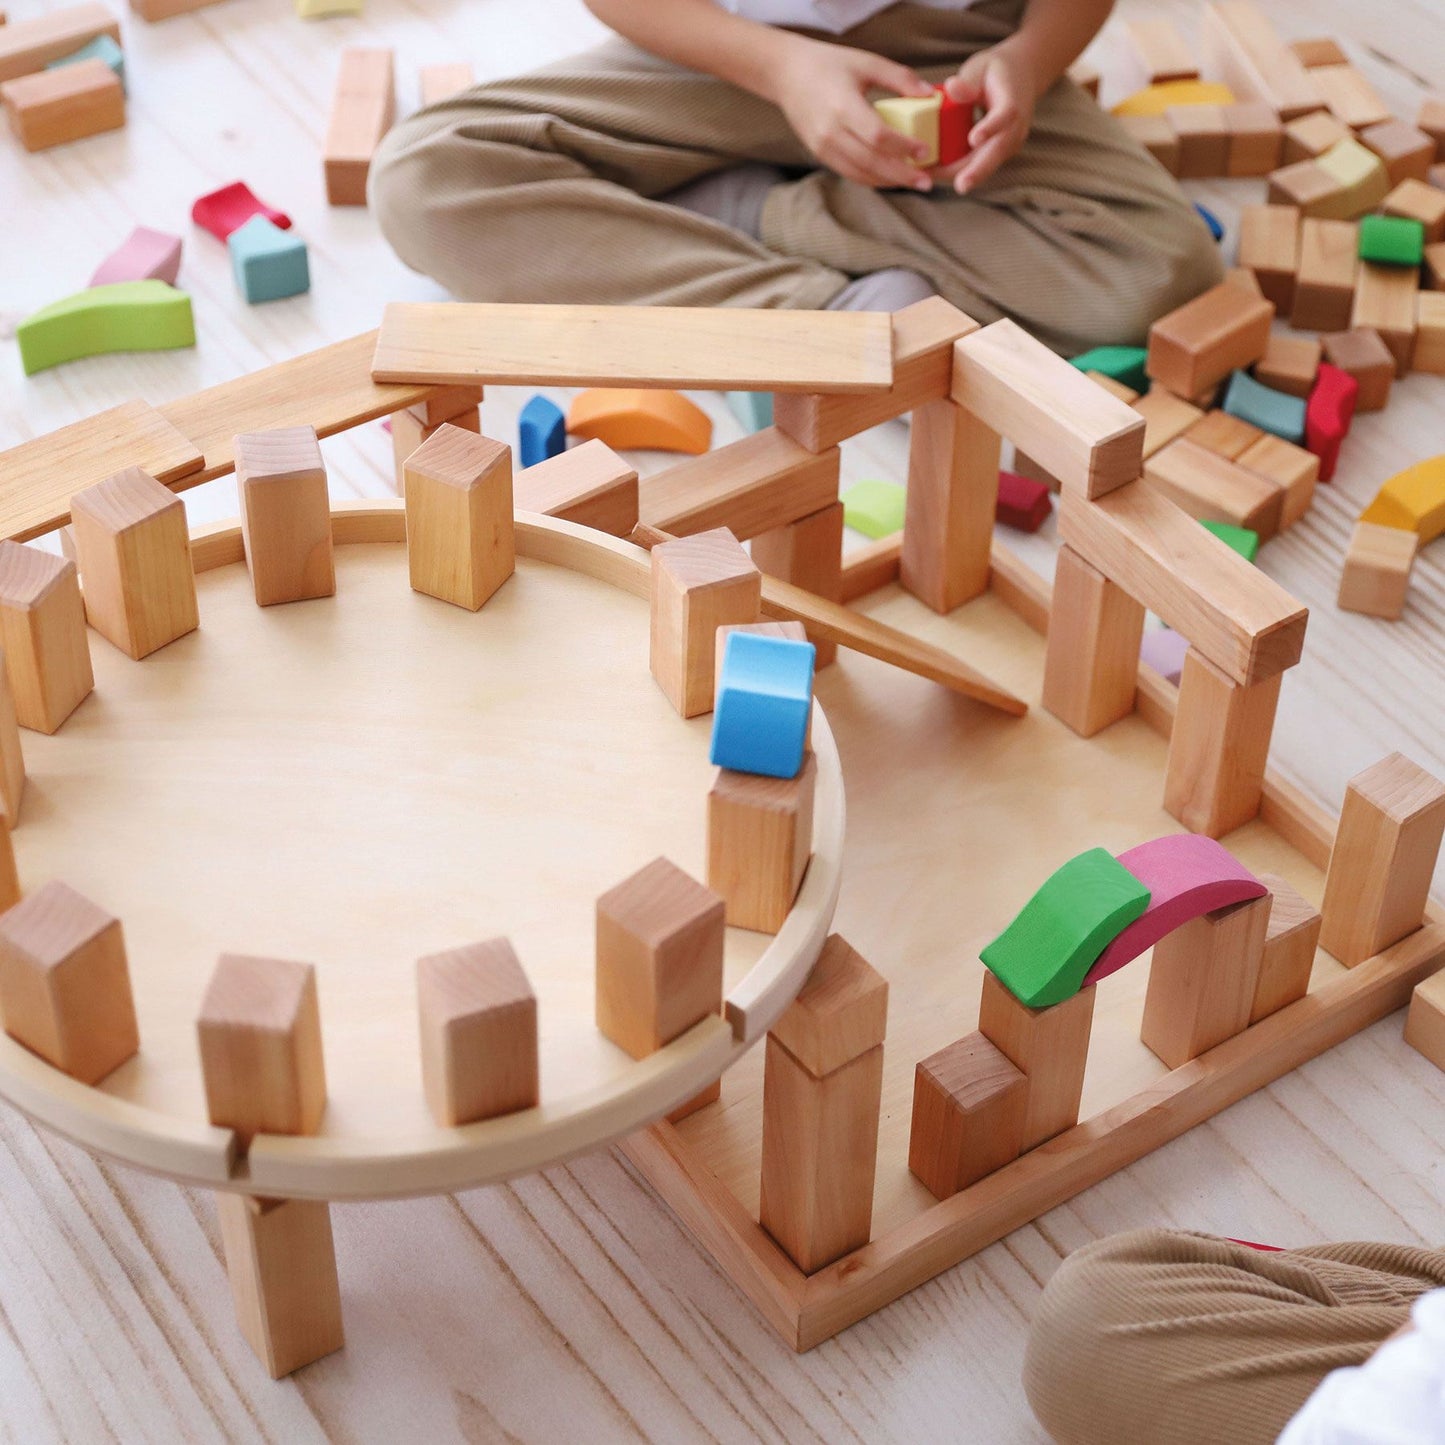 Large Natural Stepped Pyramid | Building Set | Wooden Toys for Kids | Open-Ended Play